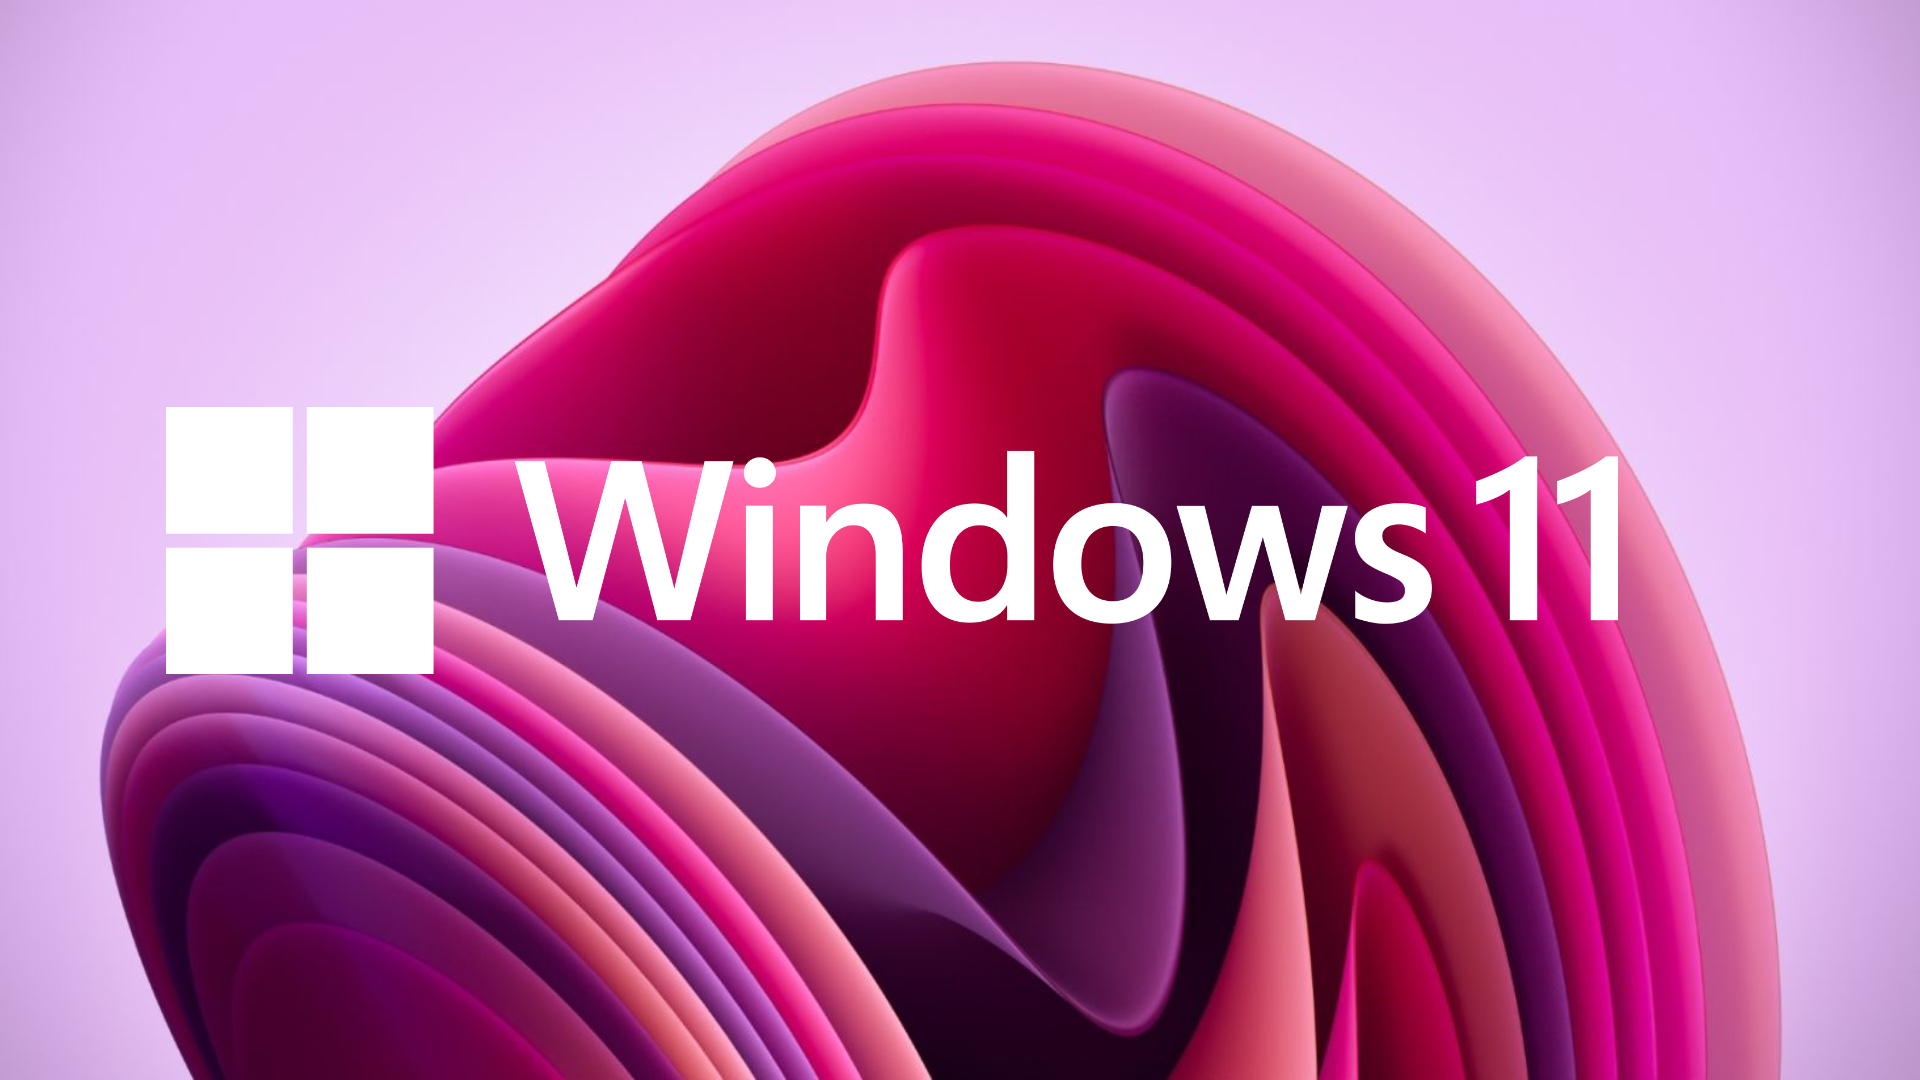 windows-11-has-never-been-so-popular-–-but-is-a-fresh-surge-of-installations-coming-from-a-place-of-love-or-mere-tolerance?